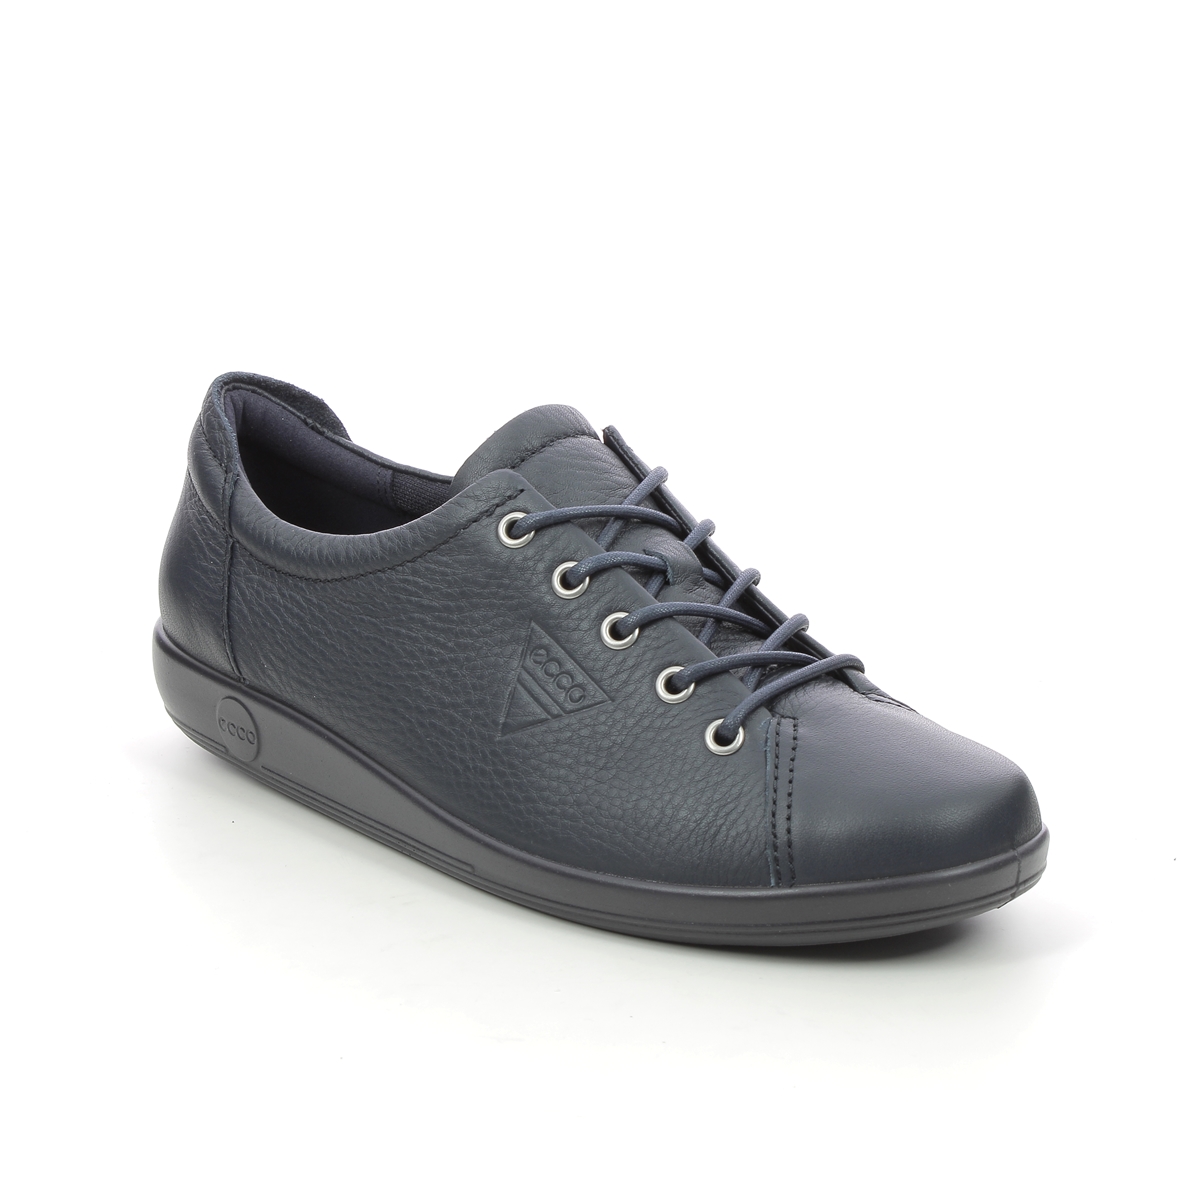 Ecco Soft 2.0 Navy Leather Womens Lacing Shoes 206503-11038 In Size 42 In Plain Navy Leather